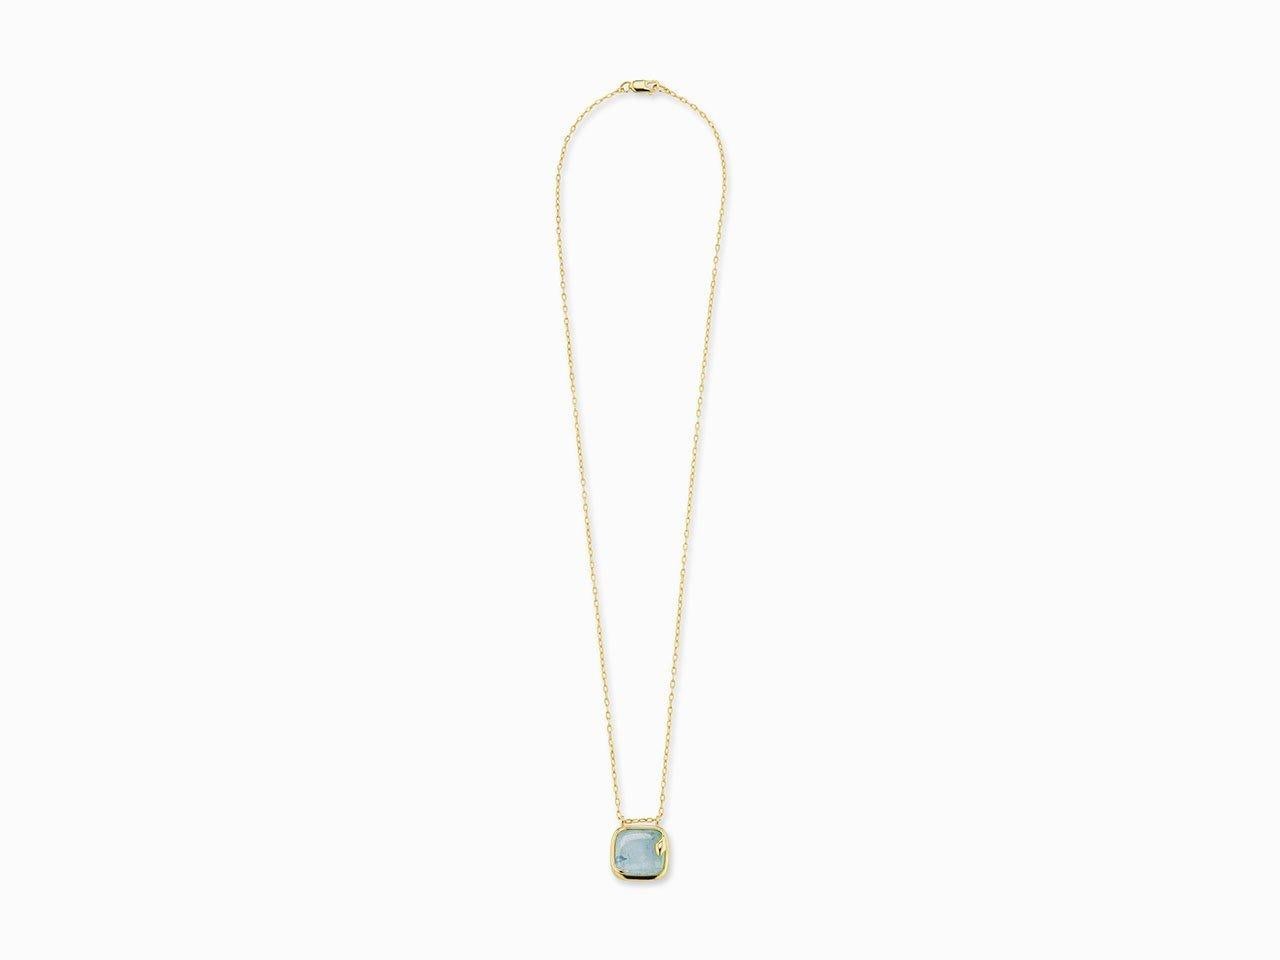 MANIAMANIA Serpentine necklace in 14k Yellow Gold, with snake detail pendant set with a custom cut Aquamarine stone, on 14k gold cable chain. Total chain length is 17.5 inches

This elegant pendant was hand made in NYC. Hand carved in wax, this